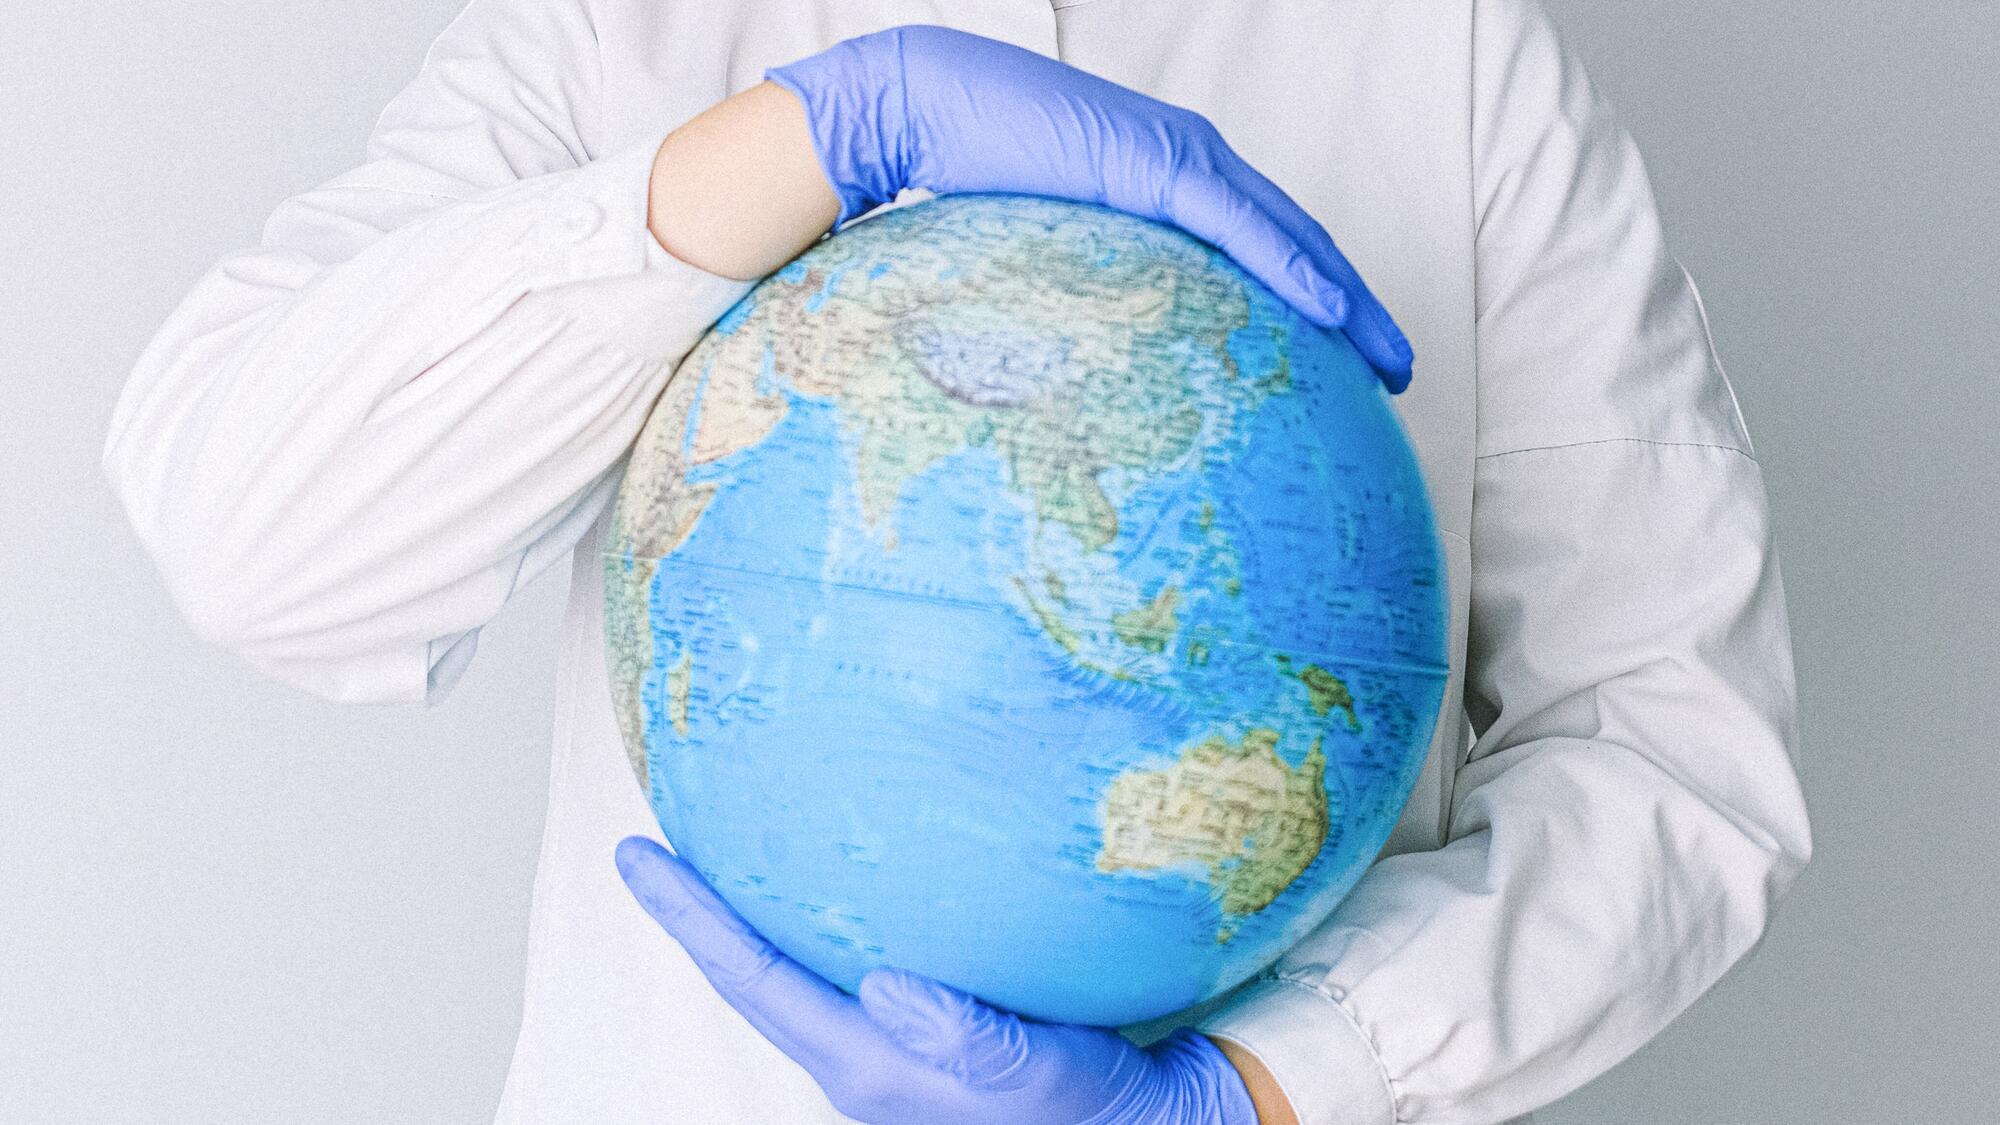 A person wearing blue medical gloves holding a globe